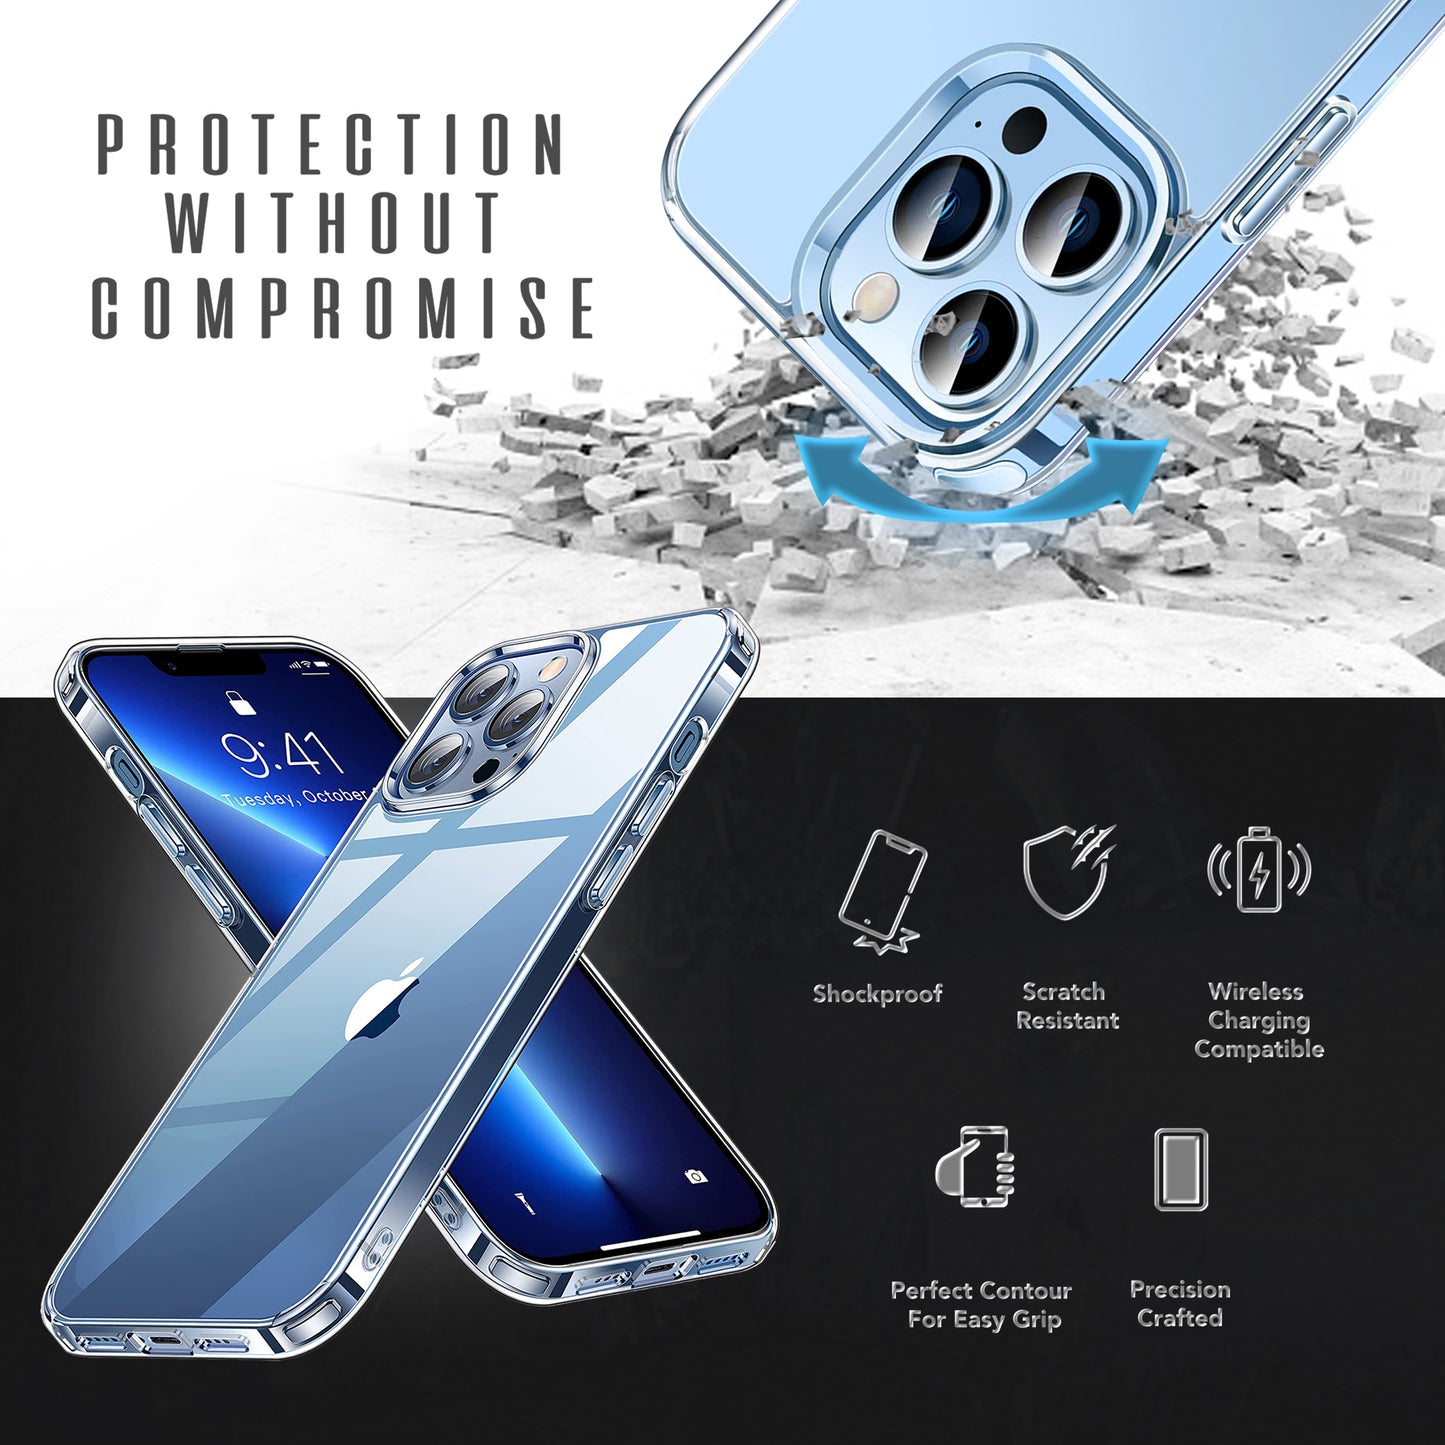 Alphatech Shockproof Case for iPhone